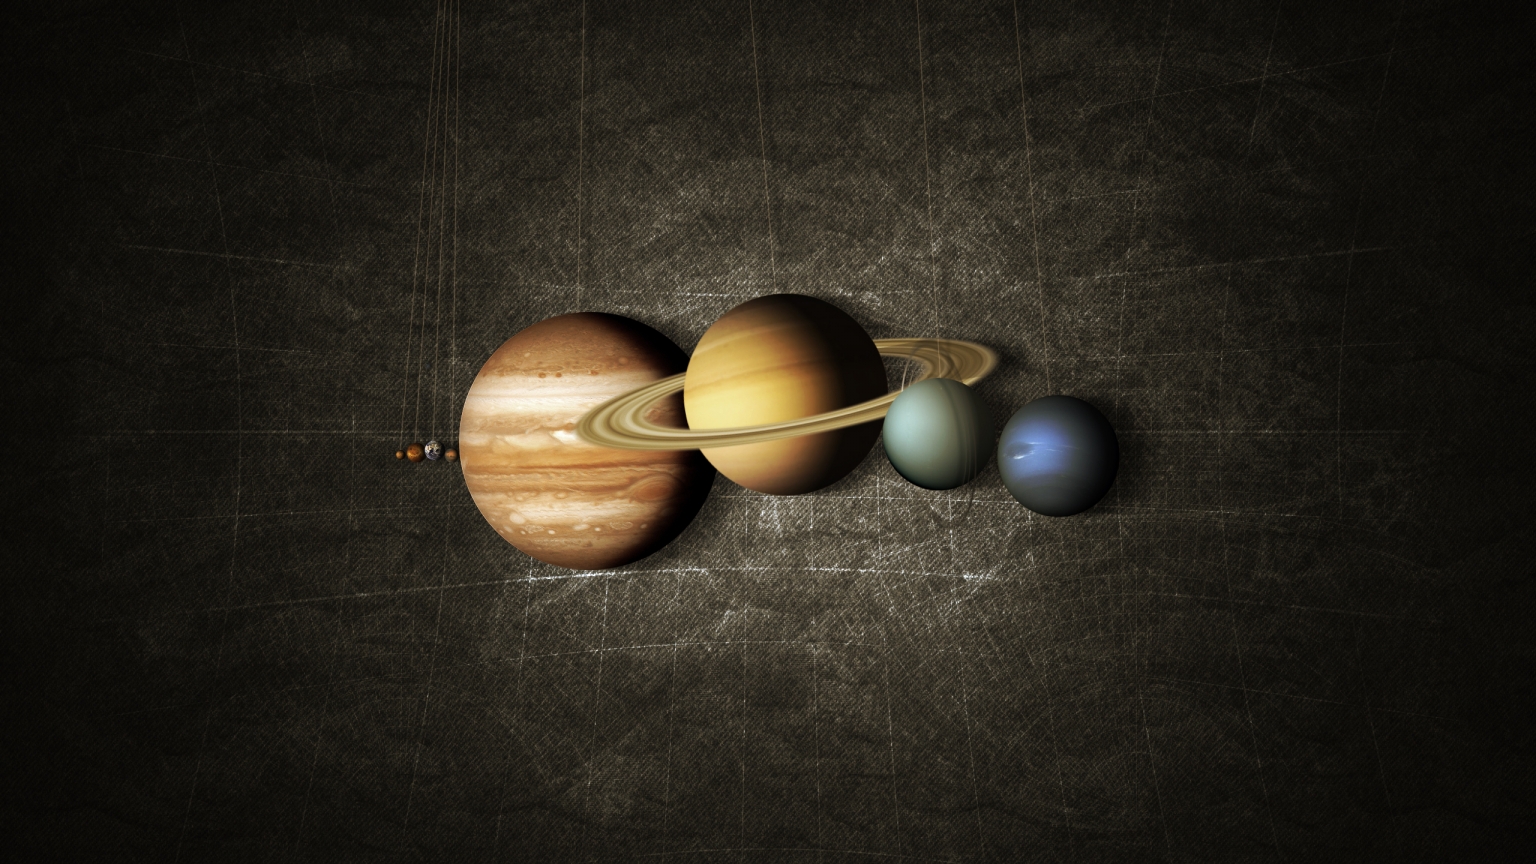 Planets Aligned for 1536 x 864 HDTV resolution